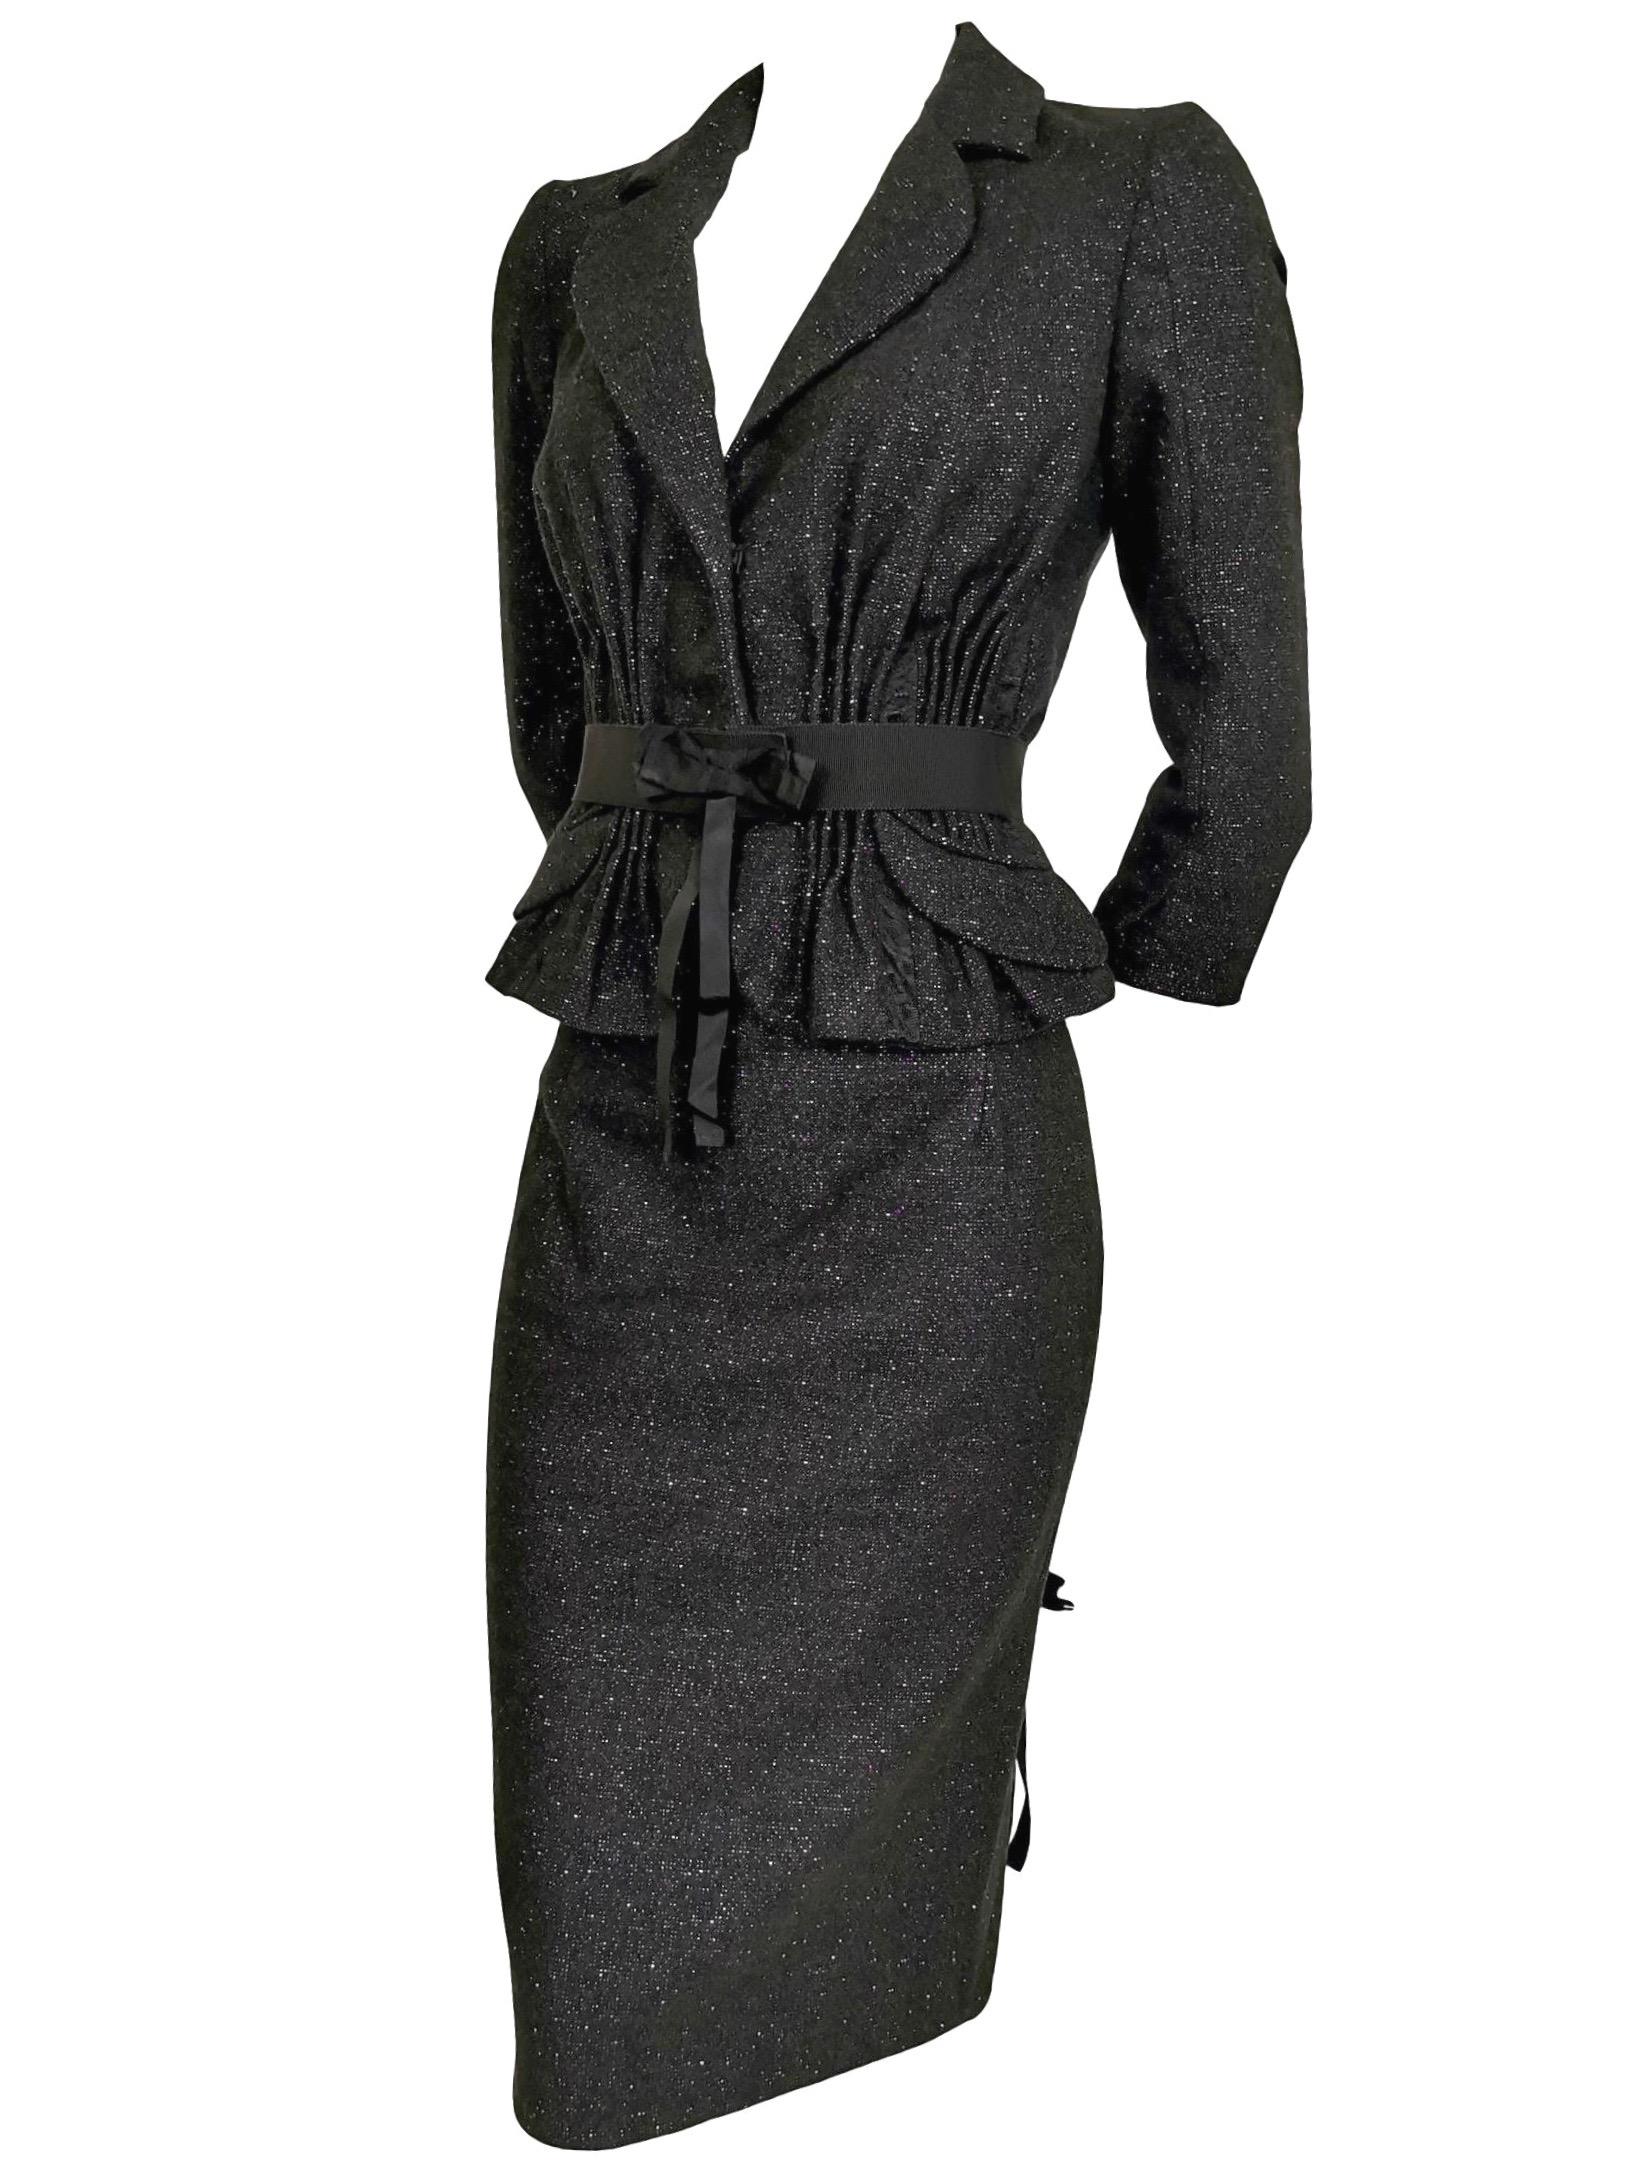 John Galliano Wool/Cashmere, Lace and Ribbon Skirt Suit A/W 2011 For Sale 6